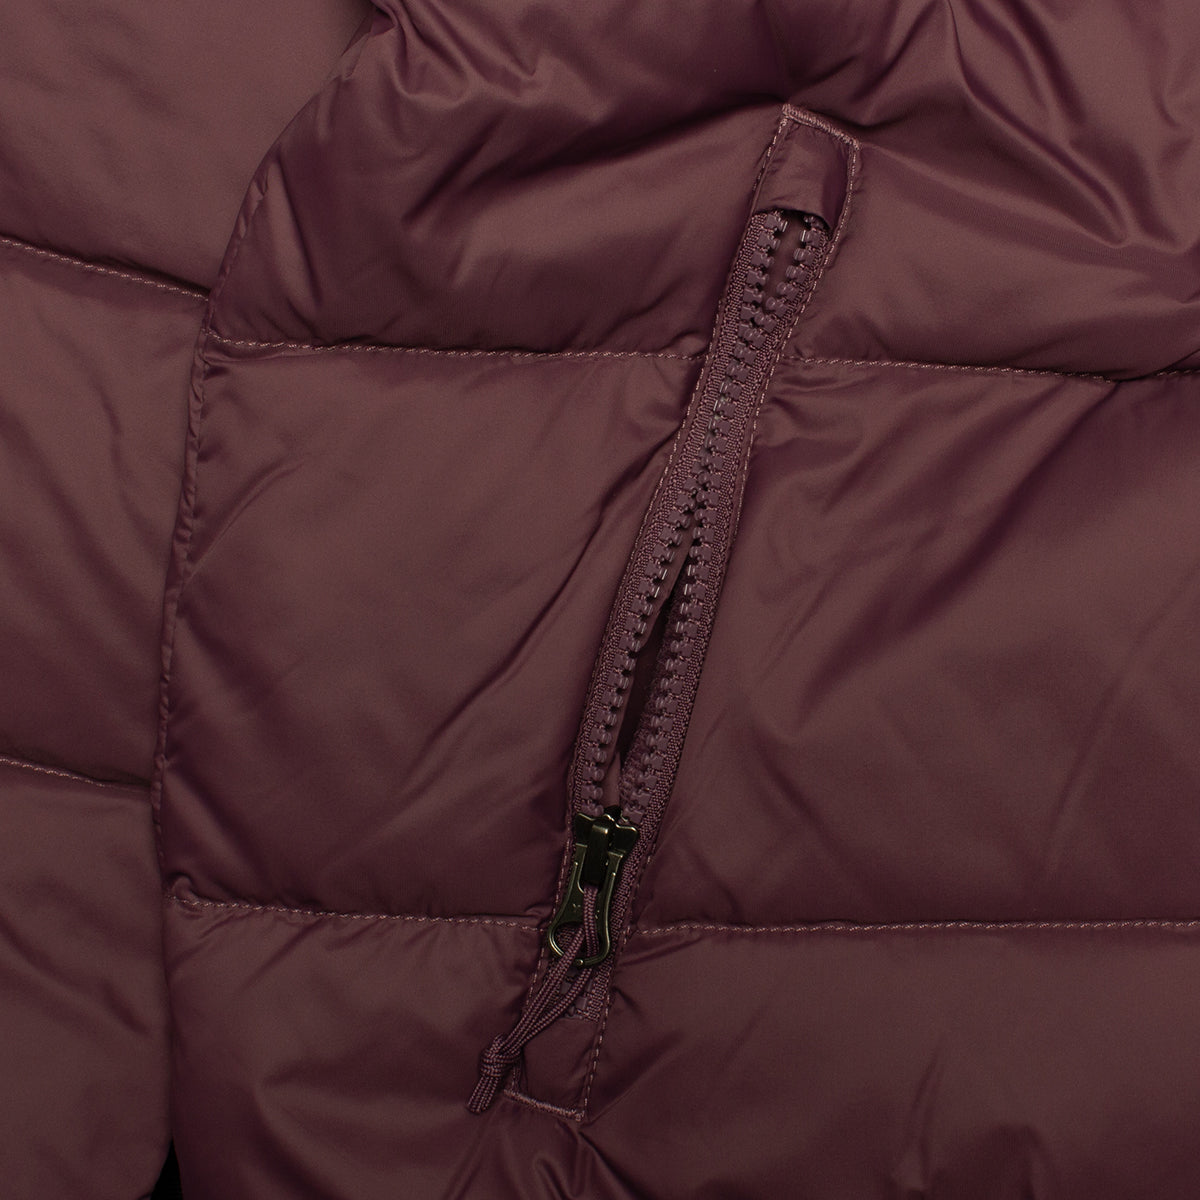 The North Face | Women's Hydrenalite Down Hooded Jacket Style # NF0A5GGG1NI1 Color : Midnight Mauve